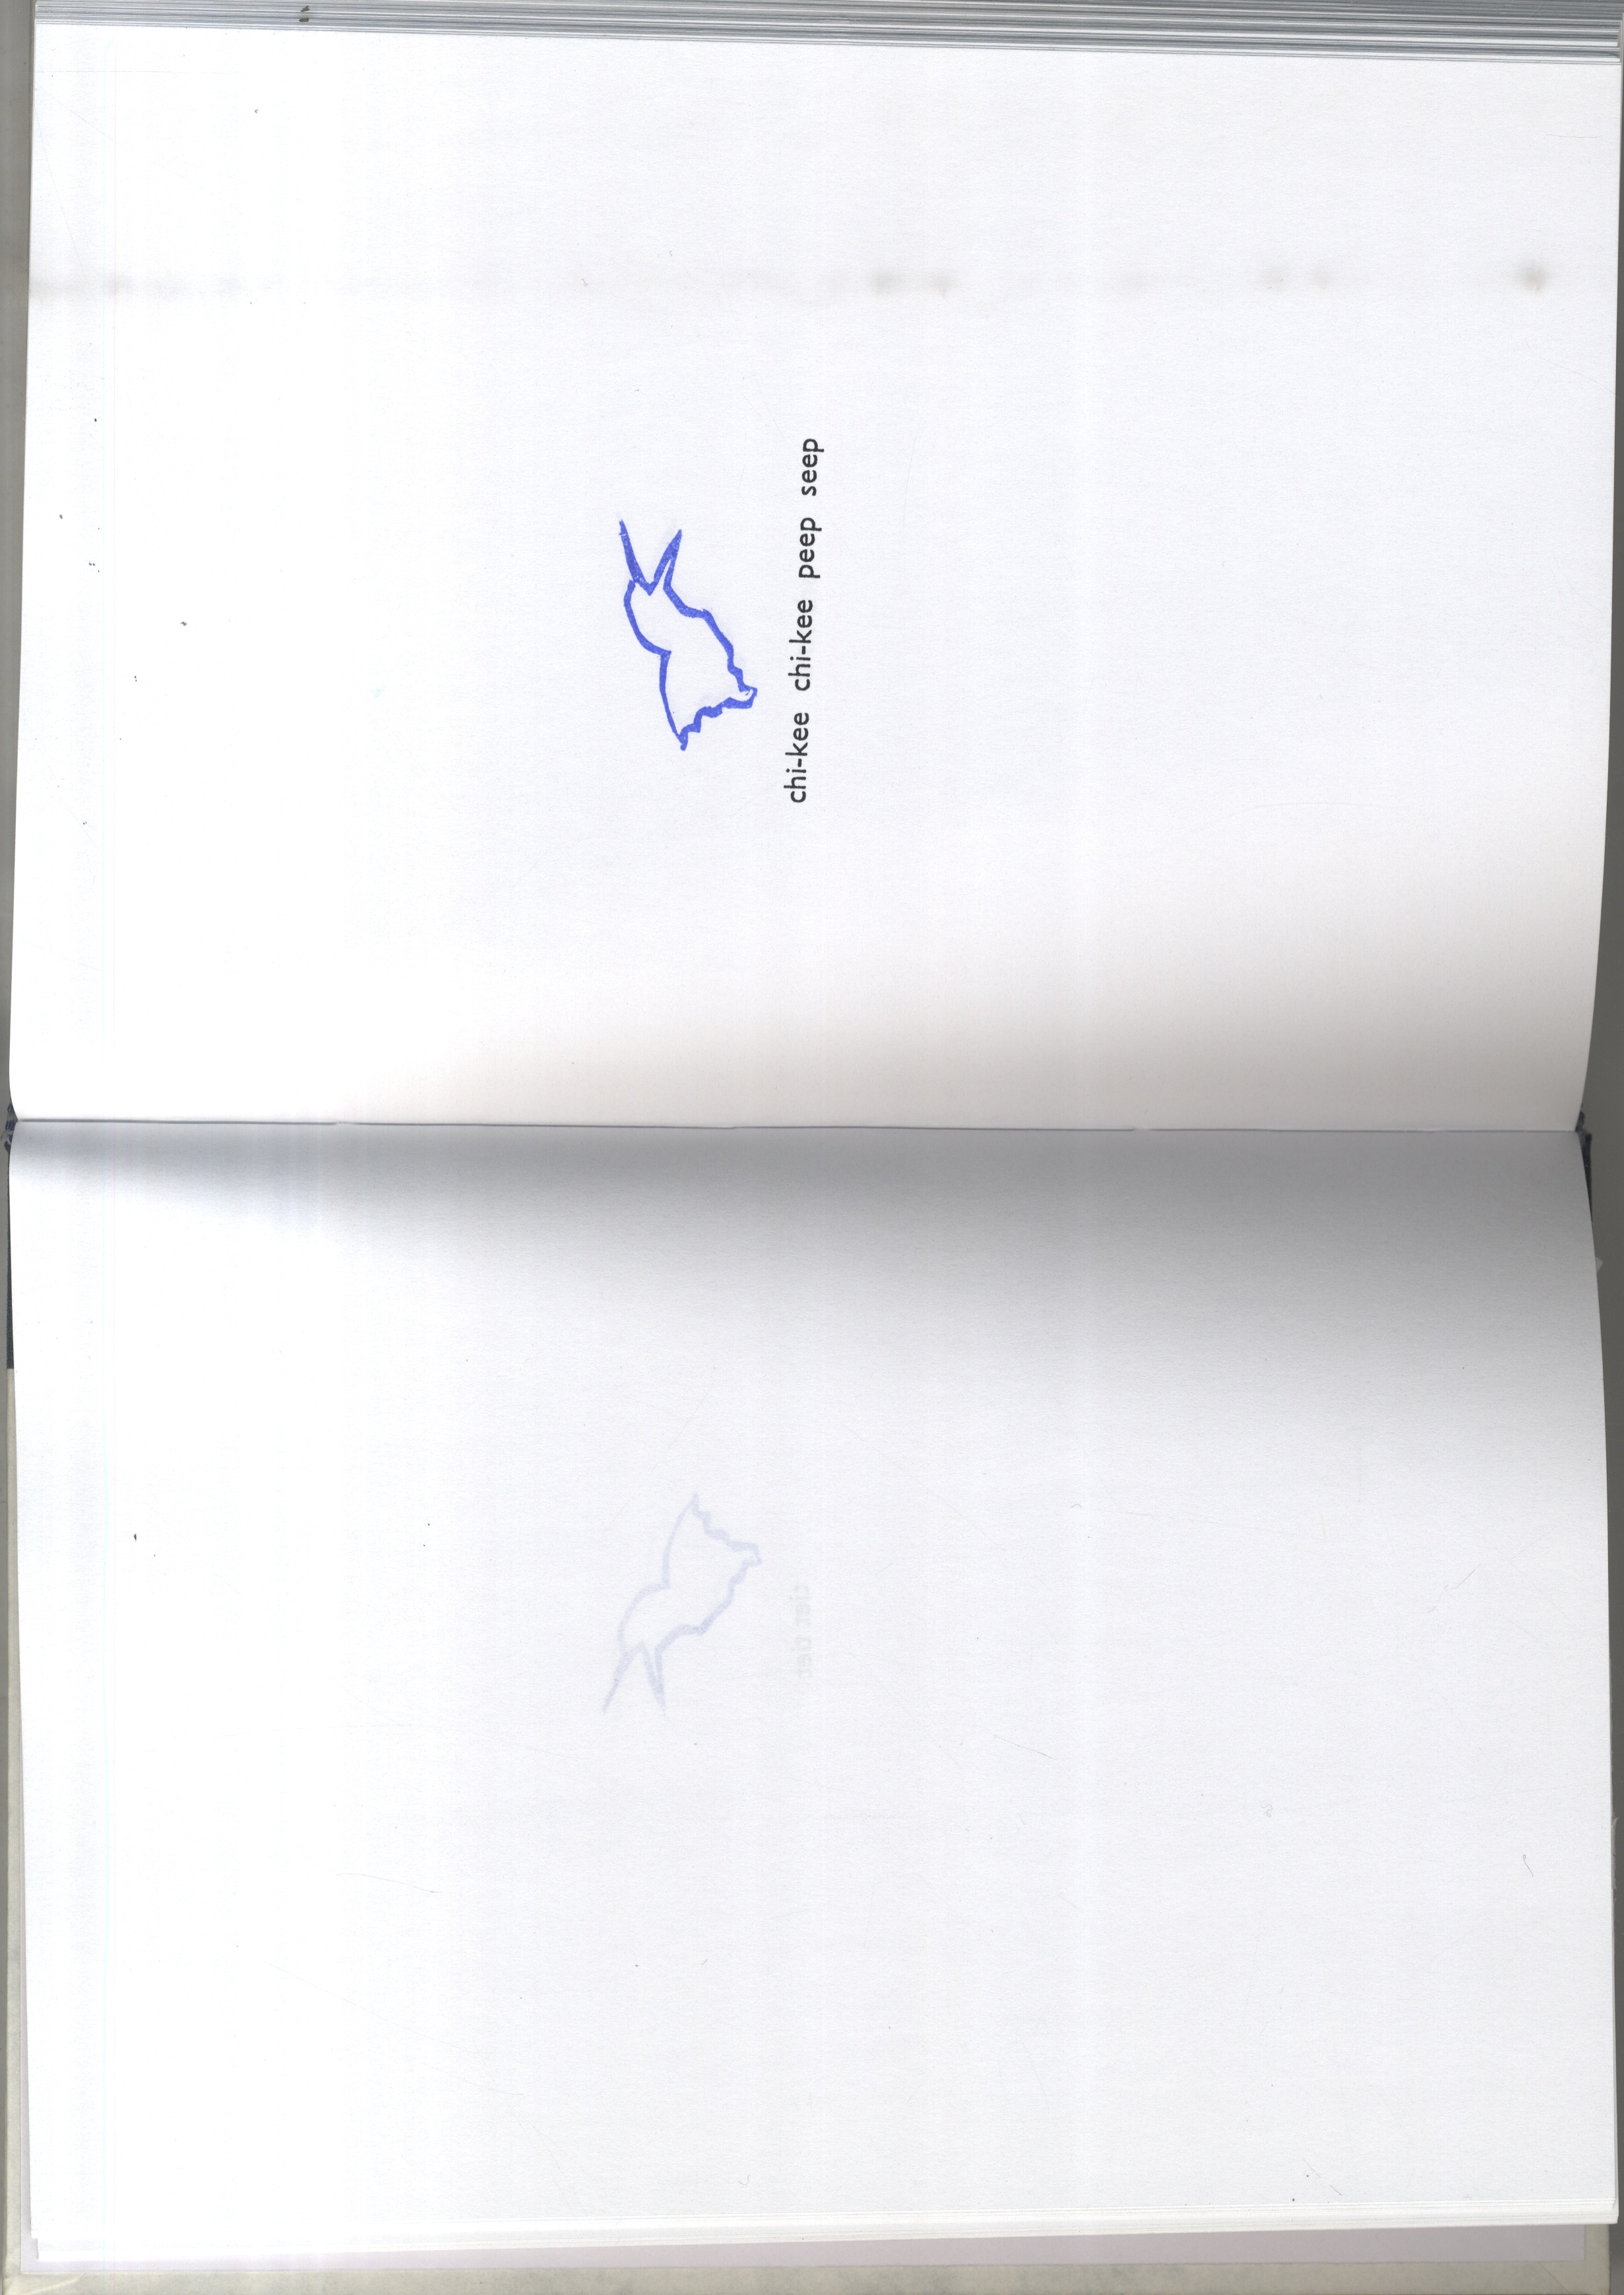 Pages from Voice = Geluid = Voix = Stimme by Hans Waanders